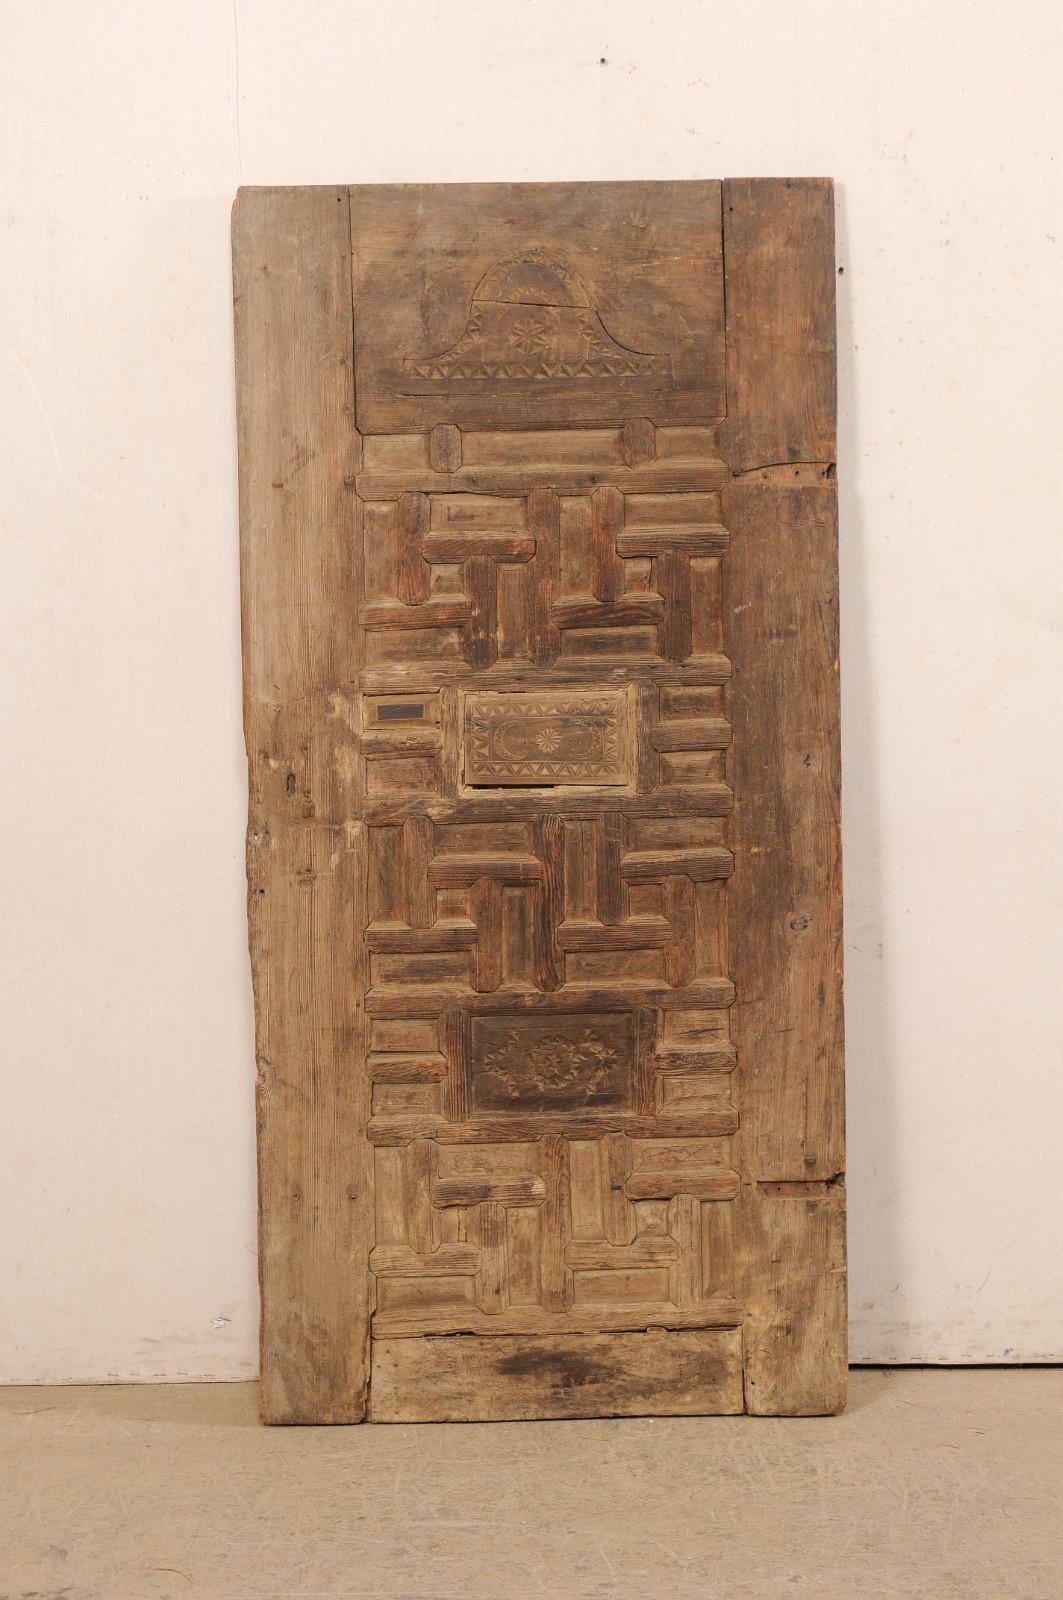 A single Turkish decoratively carved wooden door from the 19th century. This antique door from Turkey has a rustically decorated front side which has been ornately adorn in a carved geometric design, with a larger and two smaller panels that have